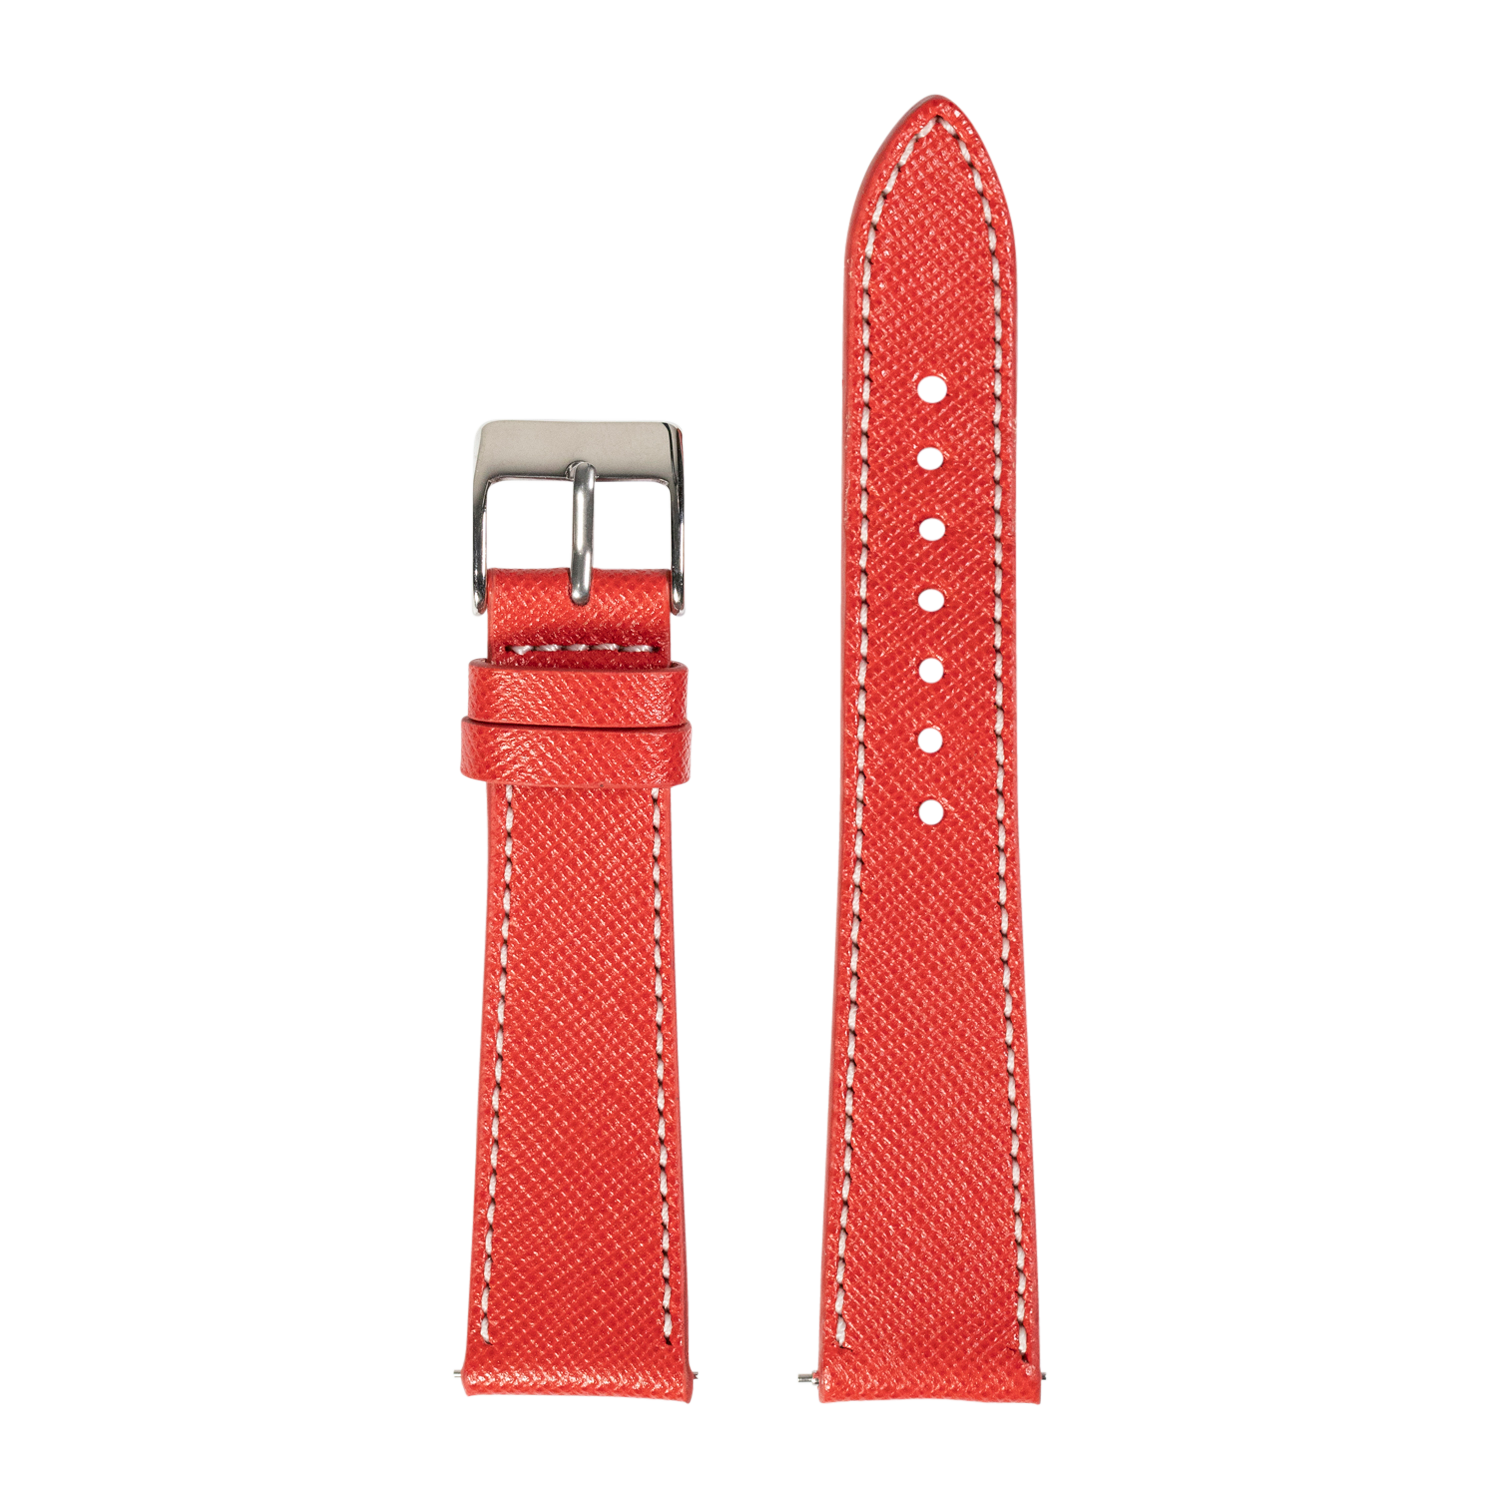 [QuickFit] Saffiano Leather - Red with White Stitching 26mm